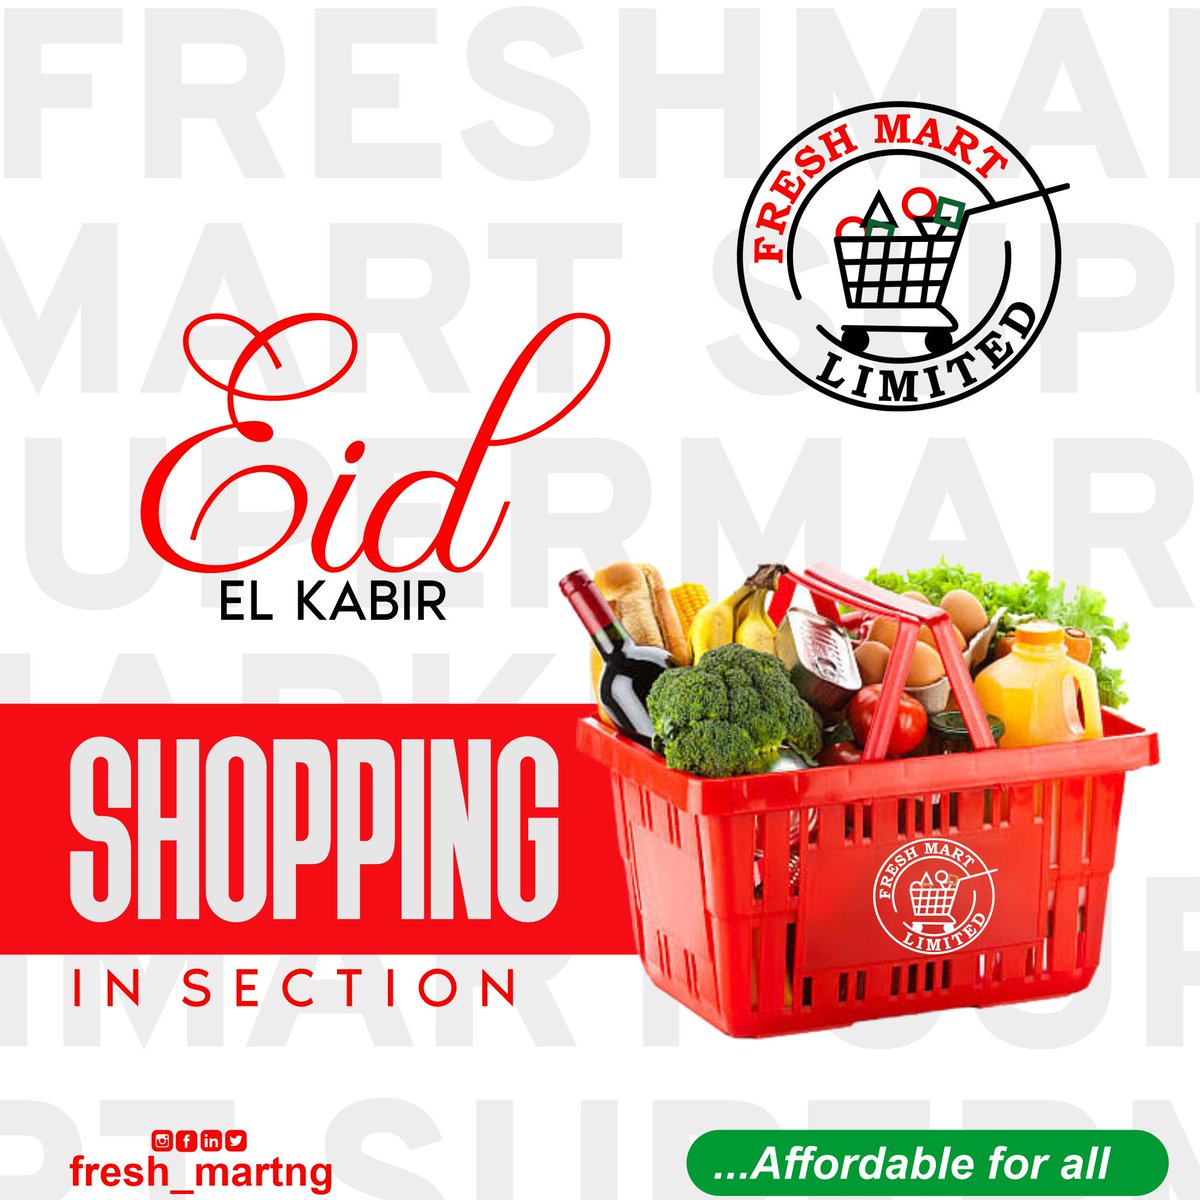 Have you Started your Shopping for Eidel Kabir? We've got you covered and affordable for all. 
#eidelkabir #shoppingmall #groceryshopping